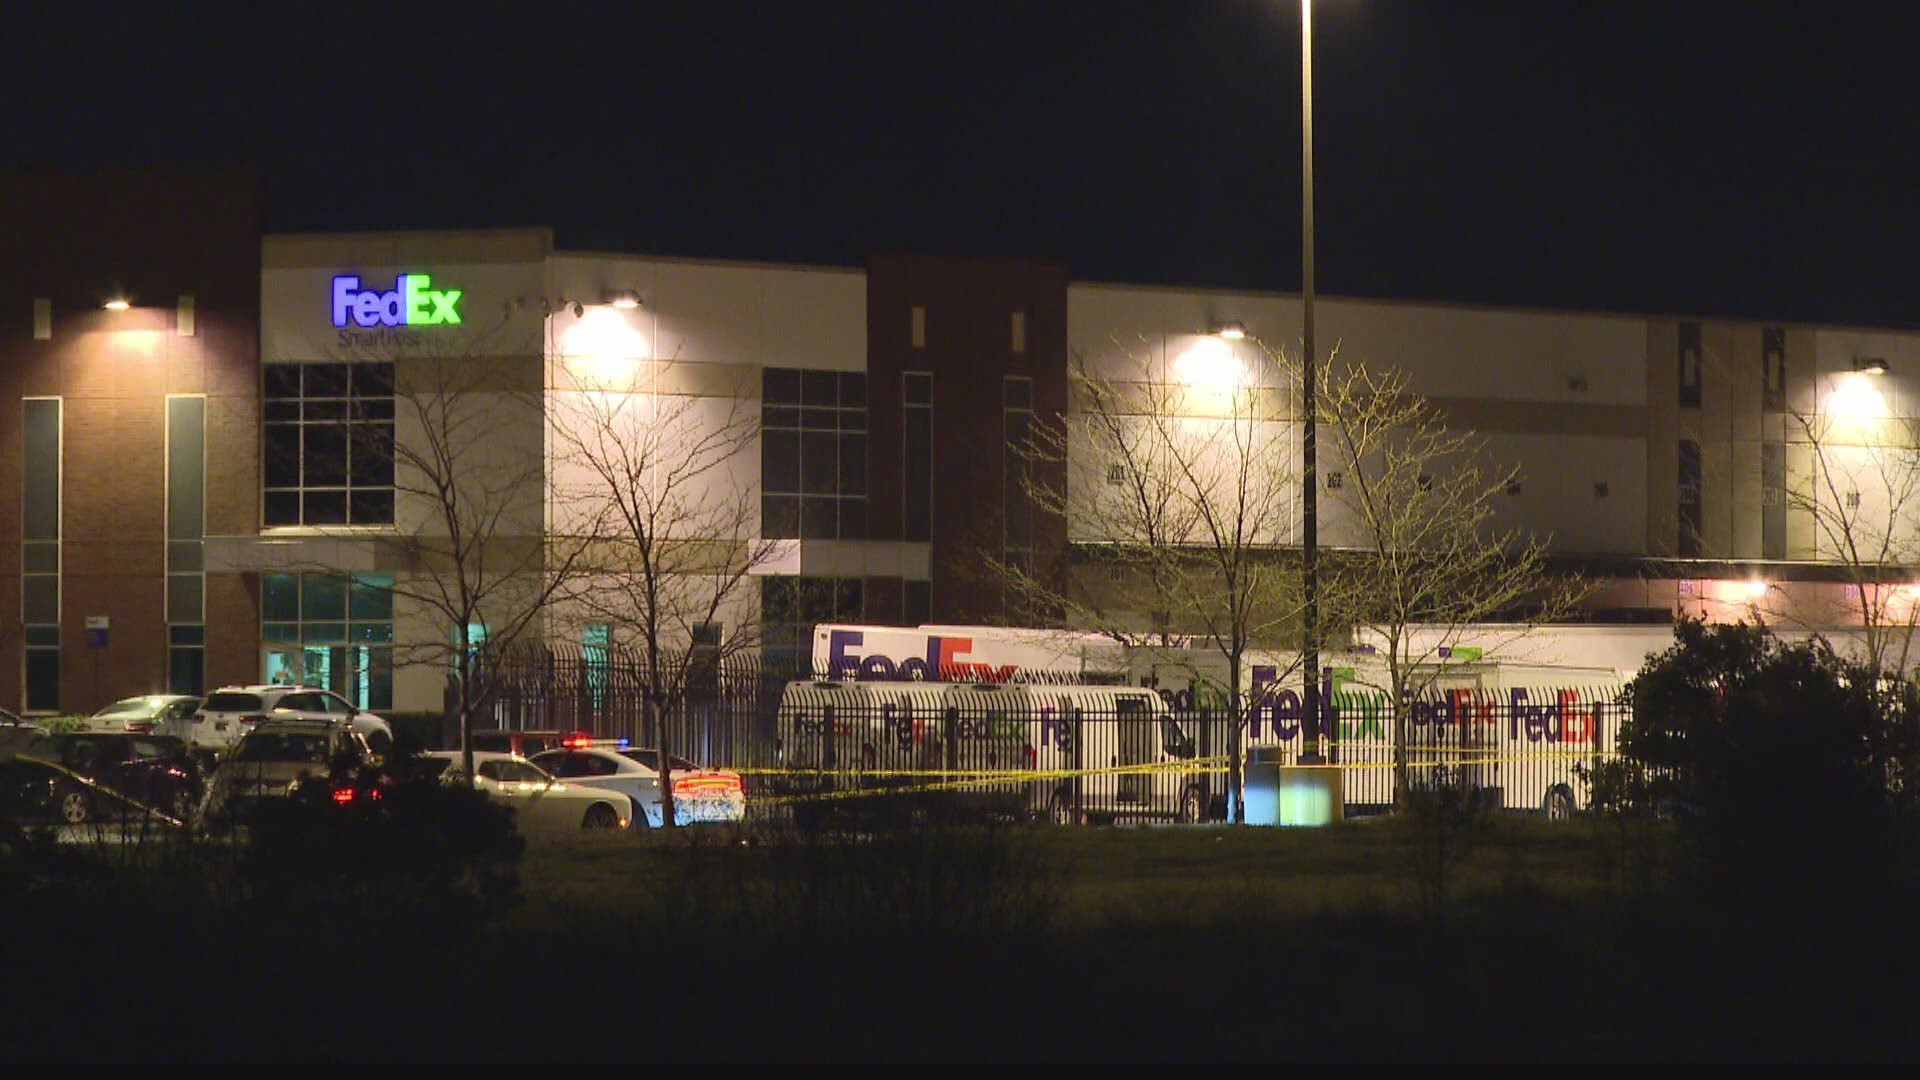 Three-and-a-half months after the FedEx mass shooting, the FBI and IMPD provided a final report on the incident Wednesday morning.